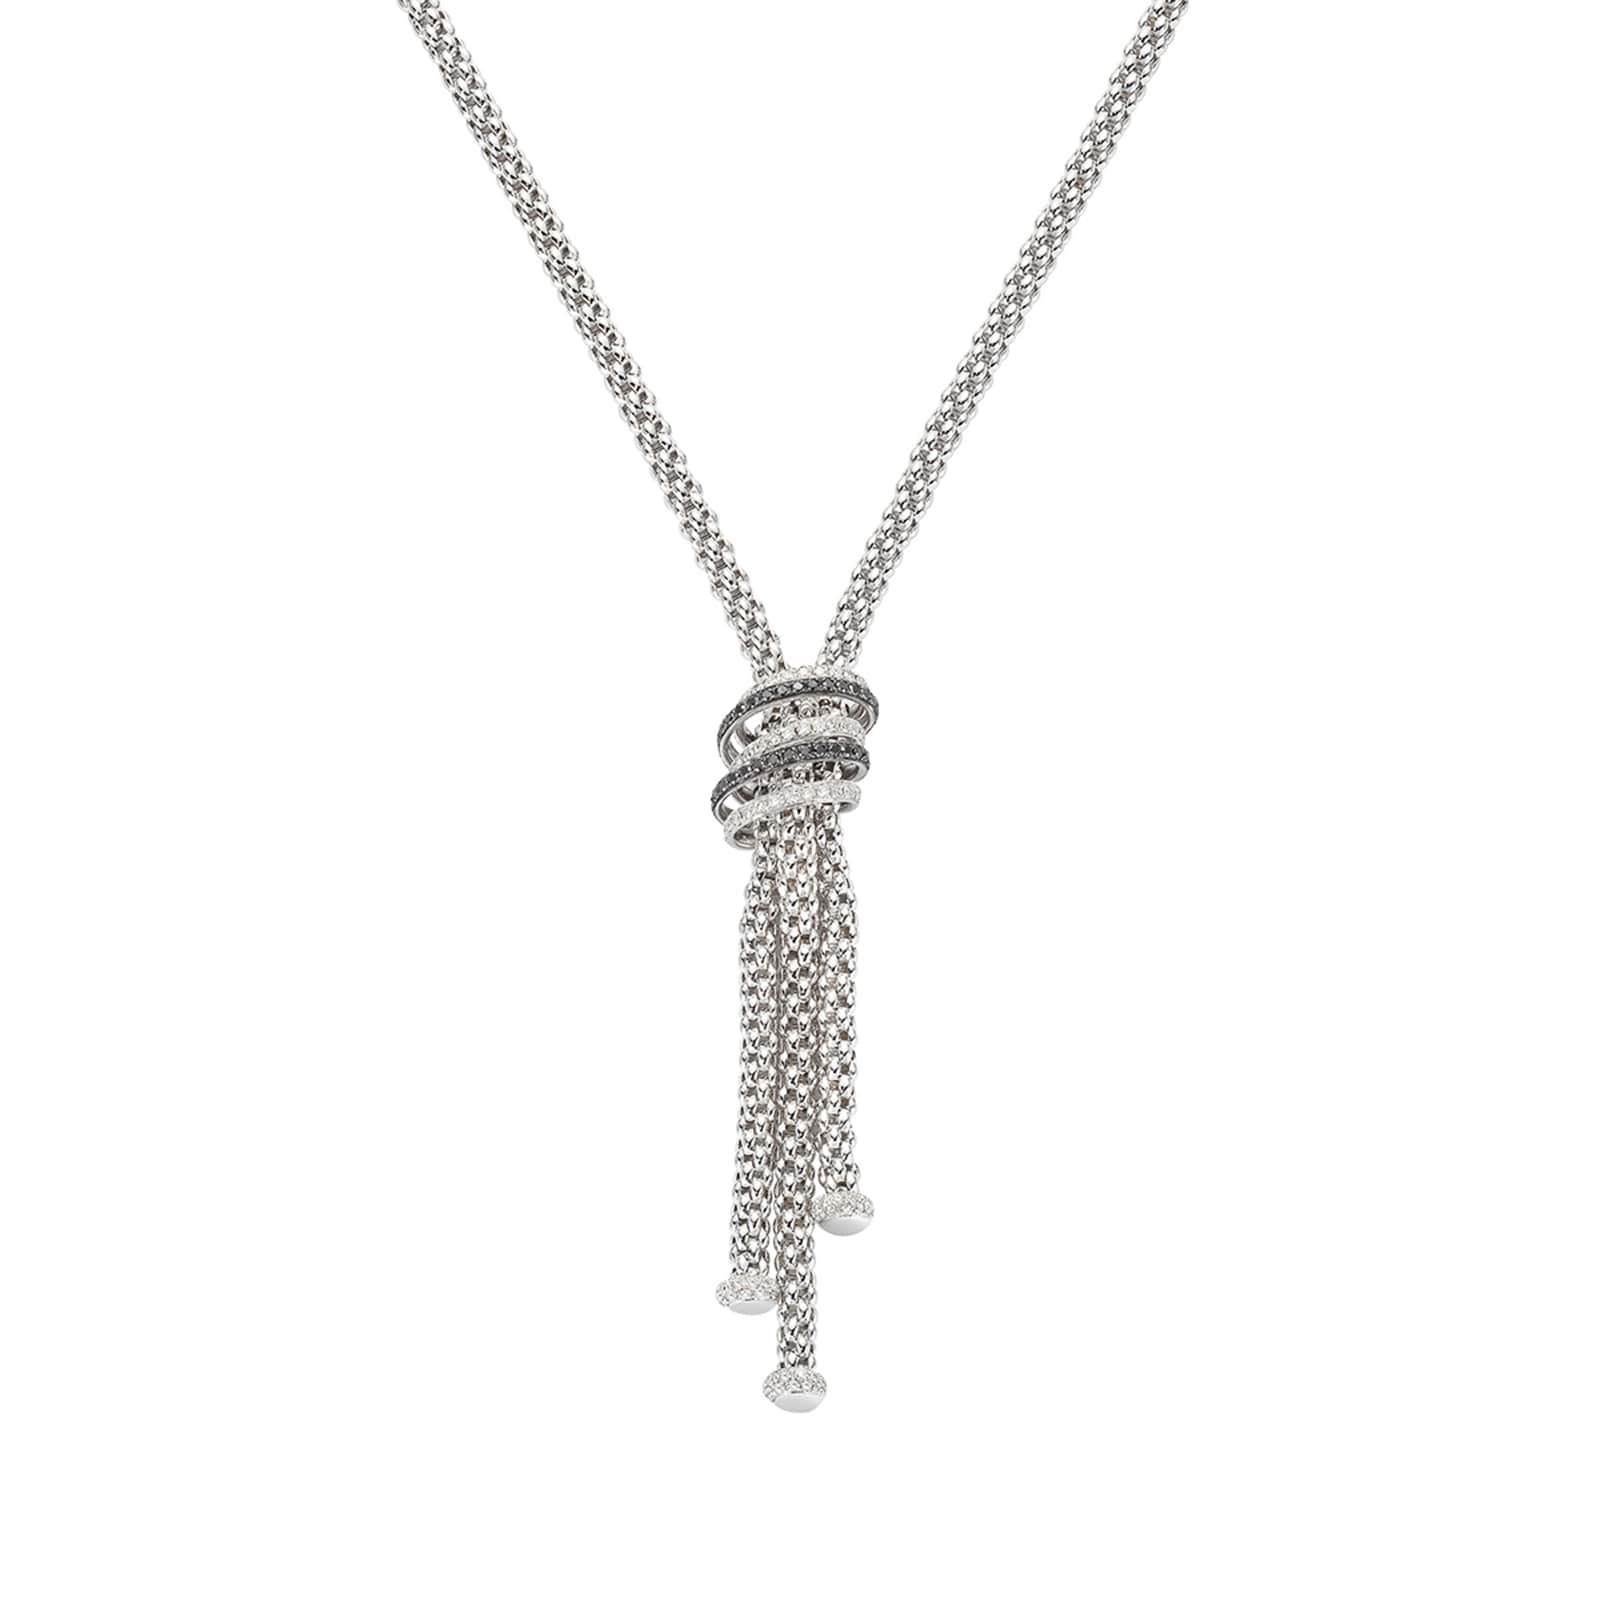 FOPE Solo MiaLuce 18ct White Gold Necklace 651CPAVE1 | Mappin and Webb